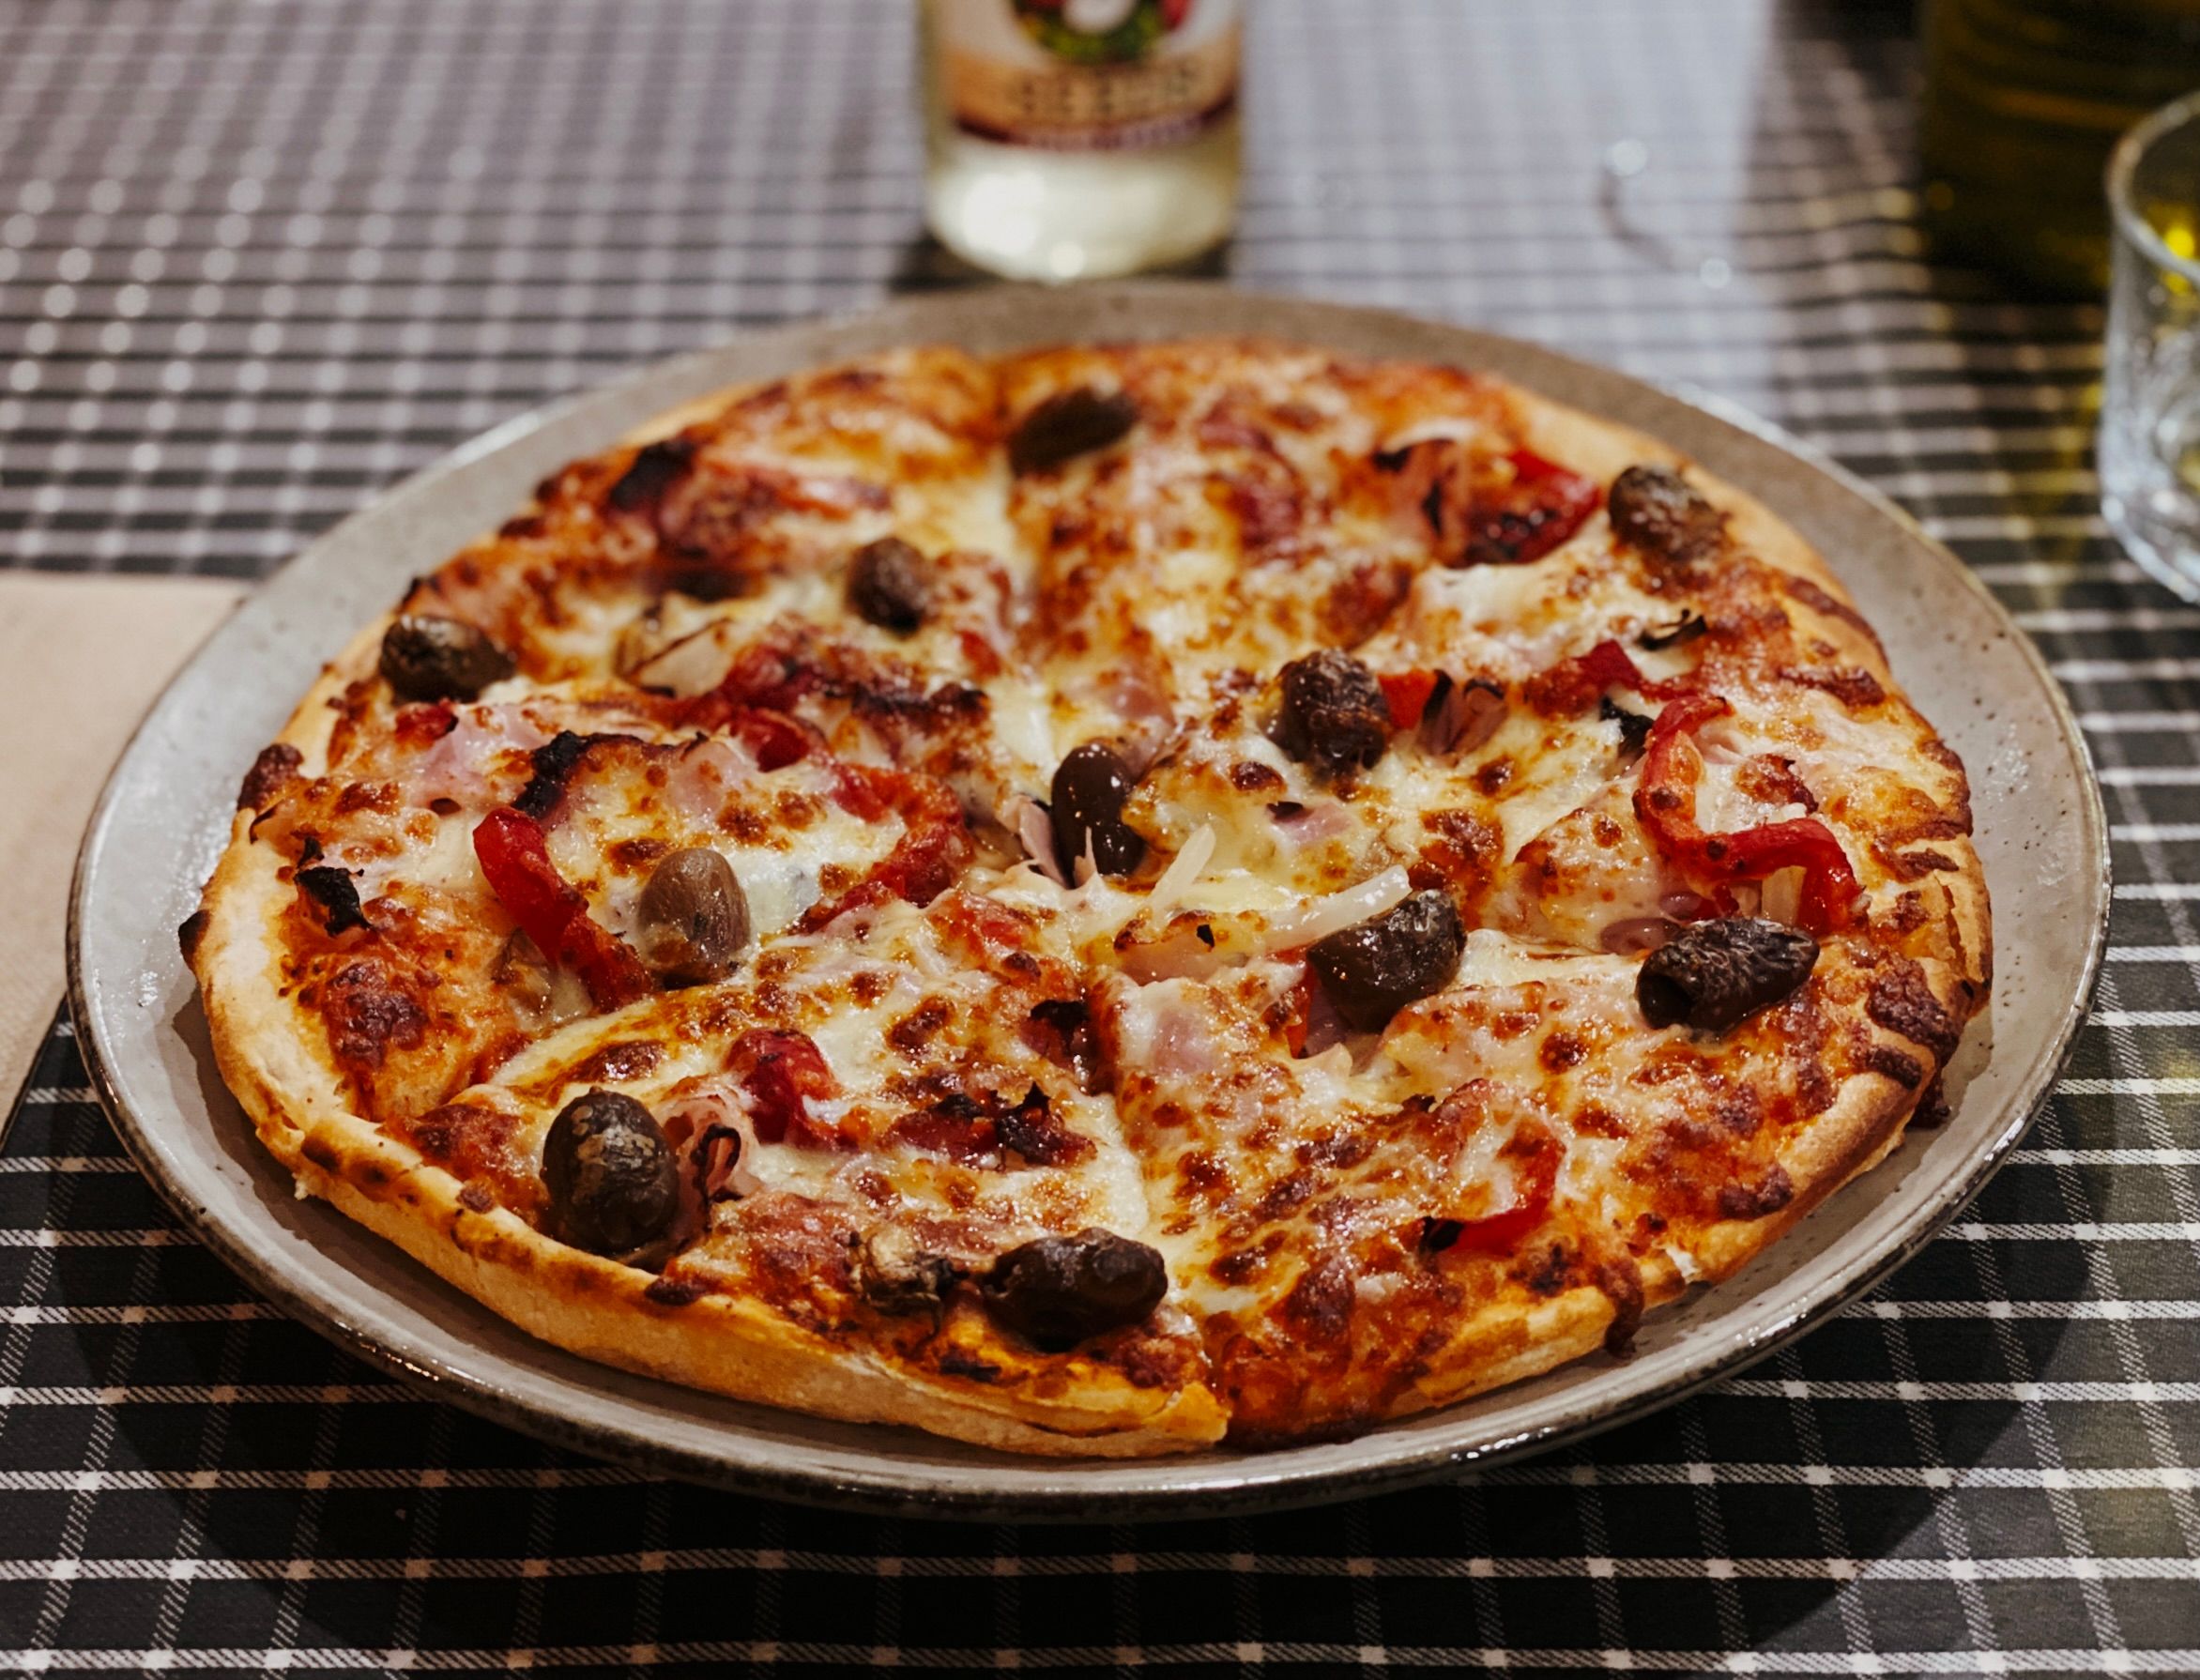 A photo of a pizza sitting on a plate. Just visible in places under the cheese are pieces of ham and onion, and on the top it has sun-dried tomatoes and olives.